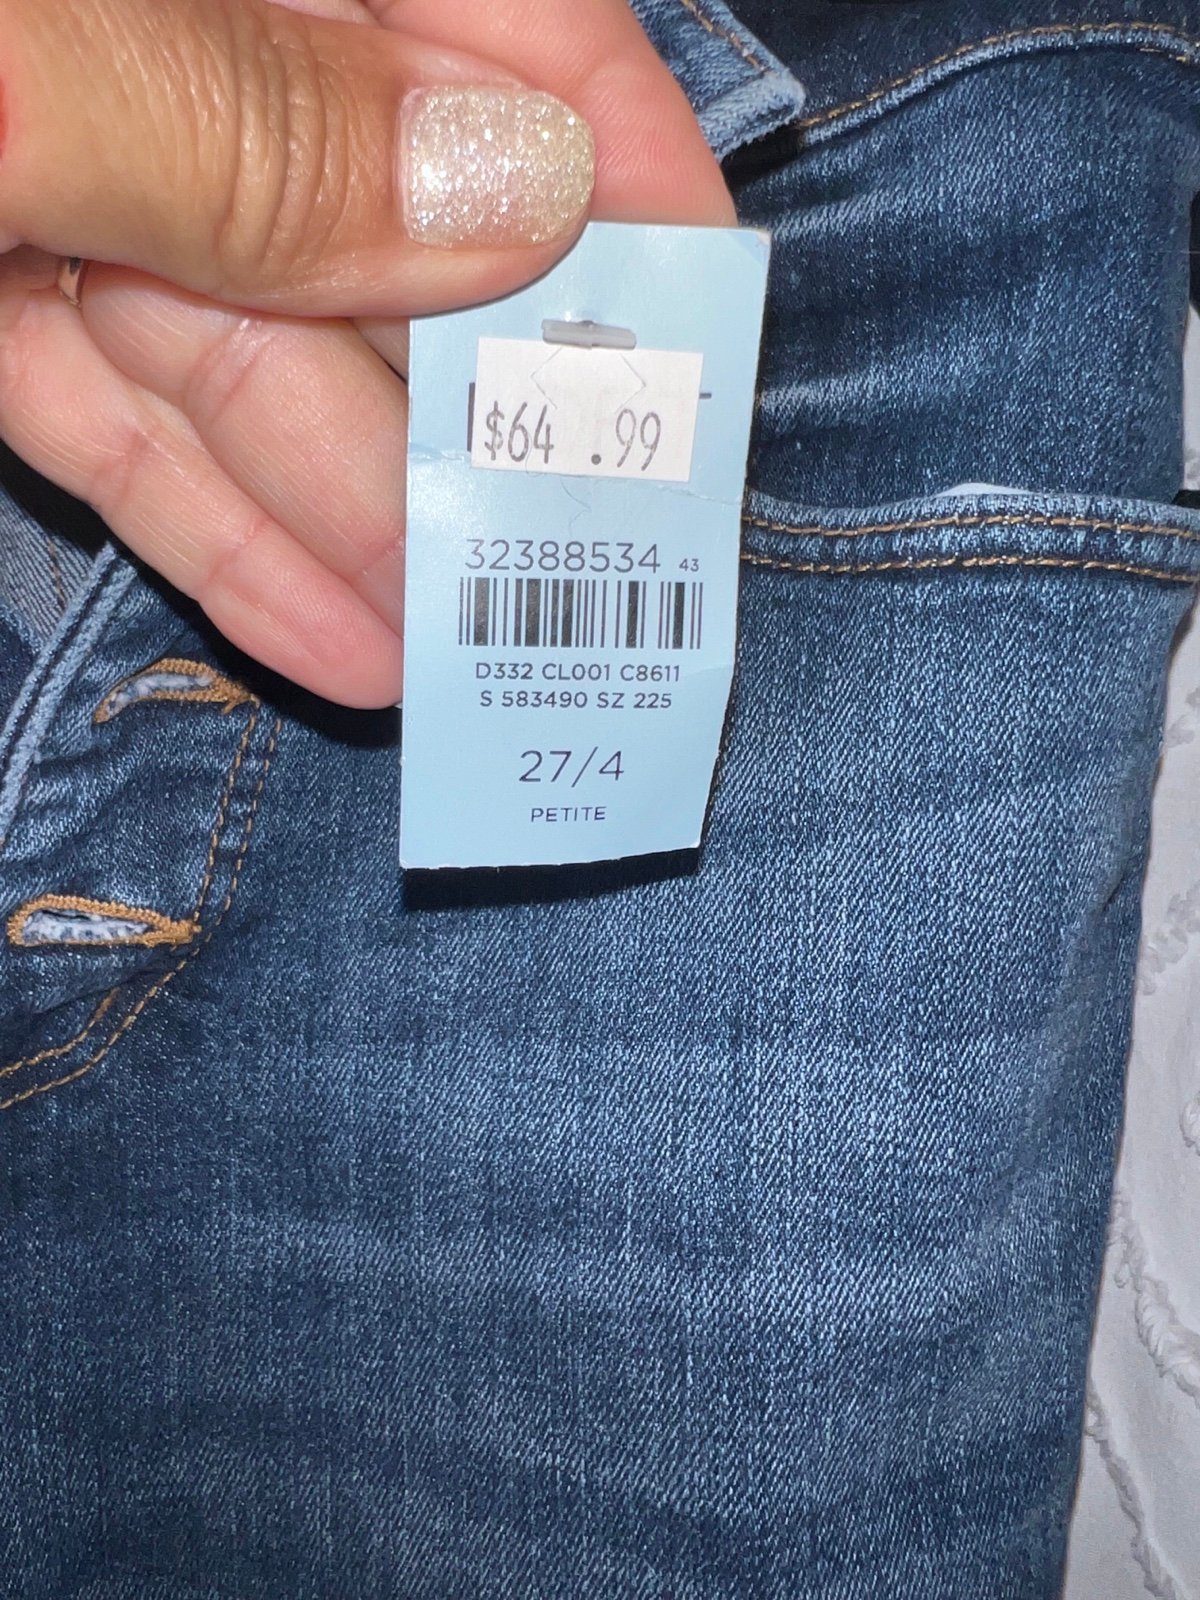 floor price NWT loft jeans HrpmlrsF9 Outlet Store